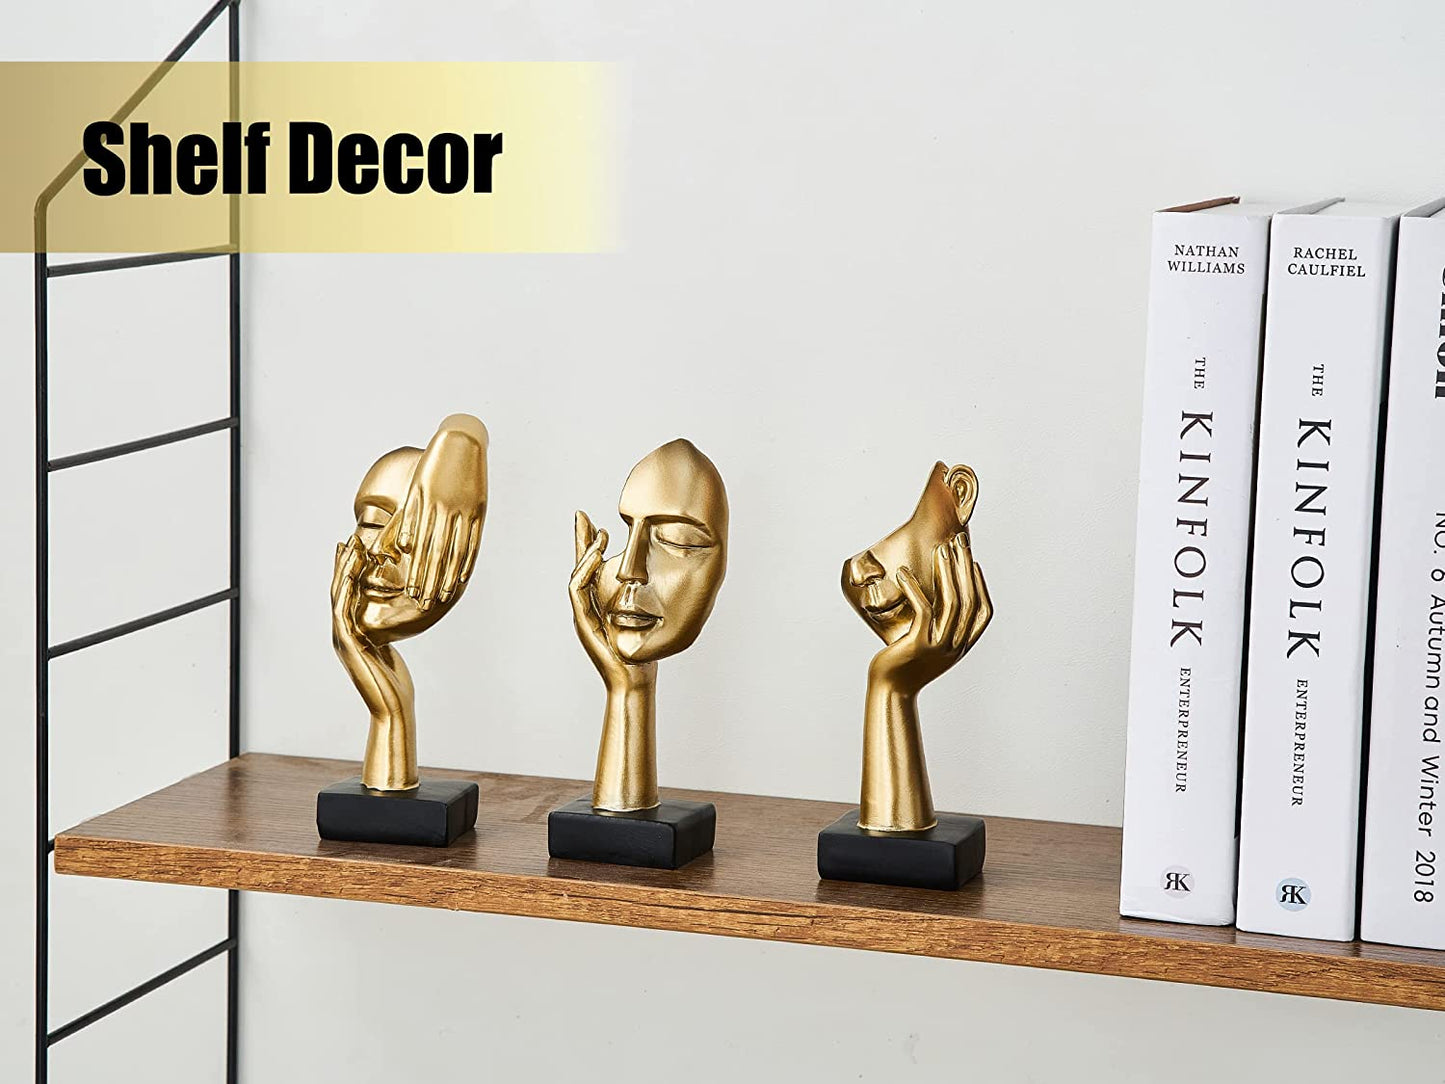 Gold Decor Face Statues for Home Decor Set of 3, Thinker Statues Shelf Decor Accents, Table Decorations for Living Room Bedroom Office, Bookshelf Decorative Objects